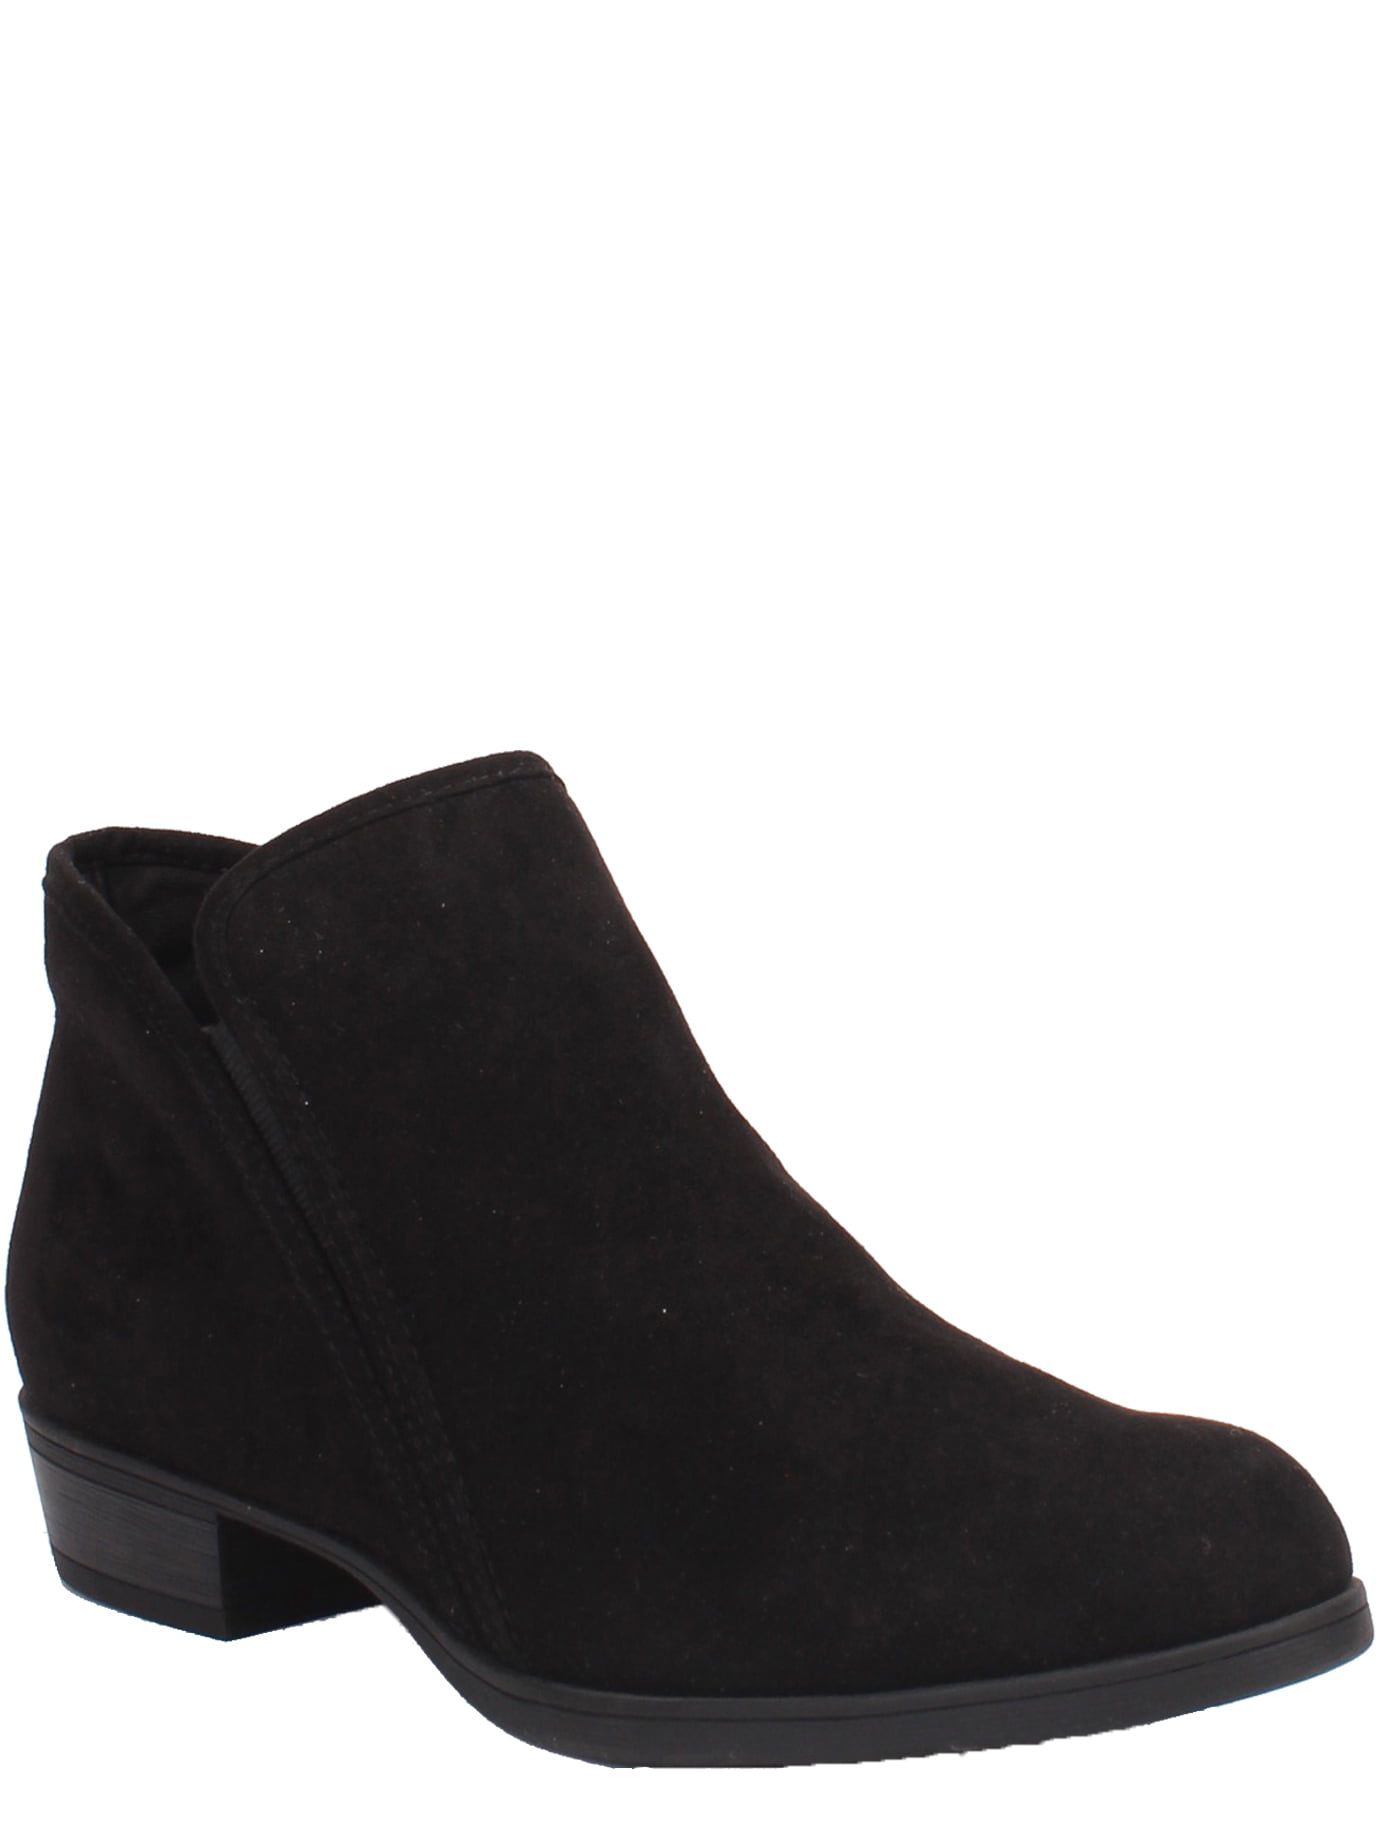 walmart womens ankle boots